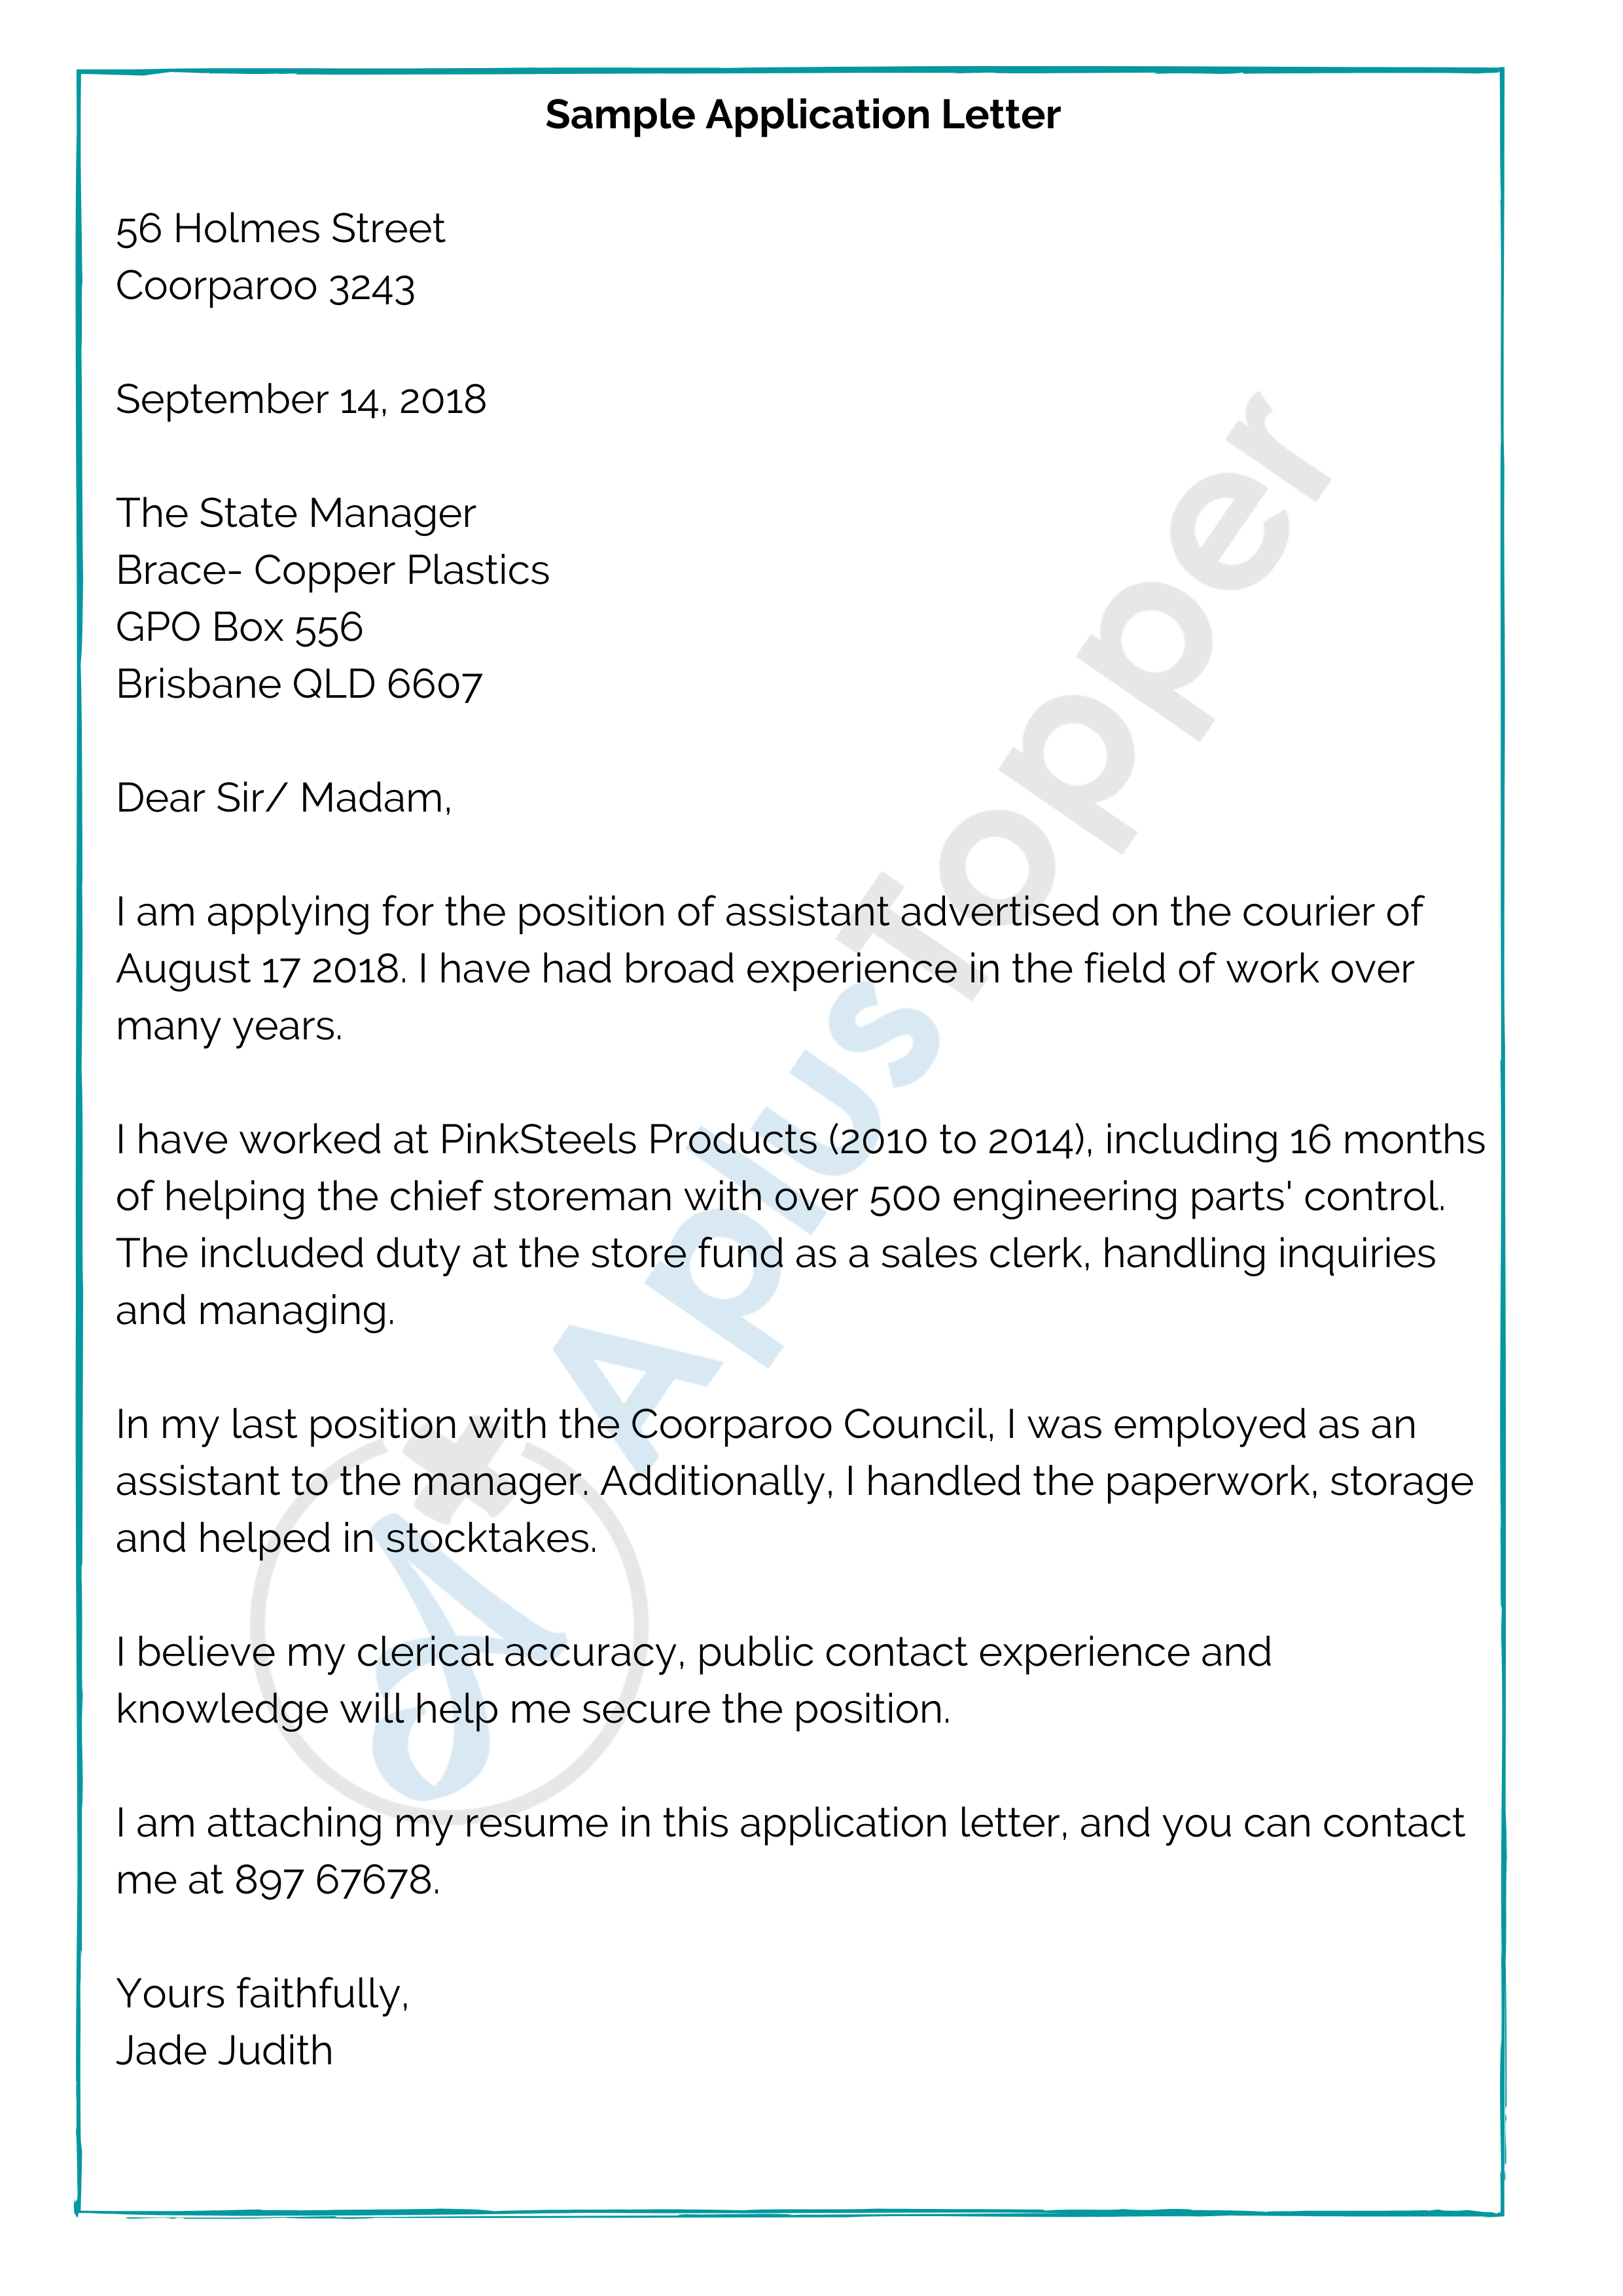 the body of application letter